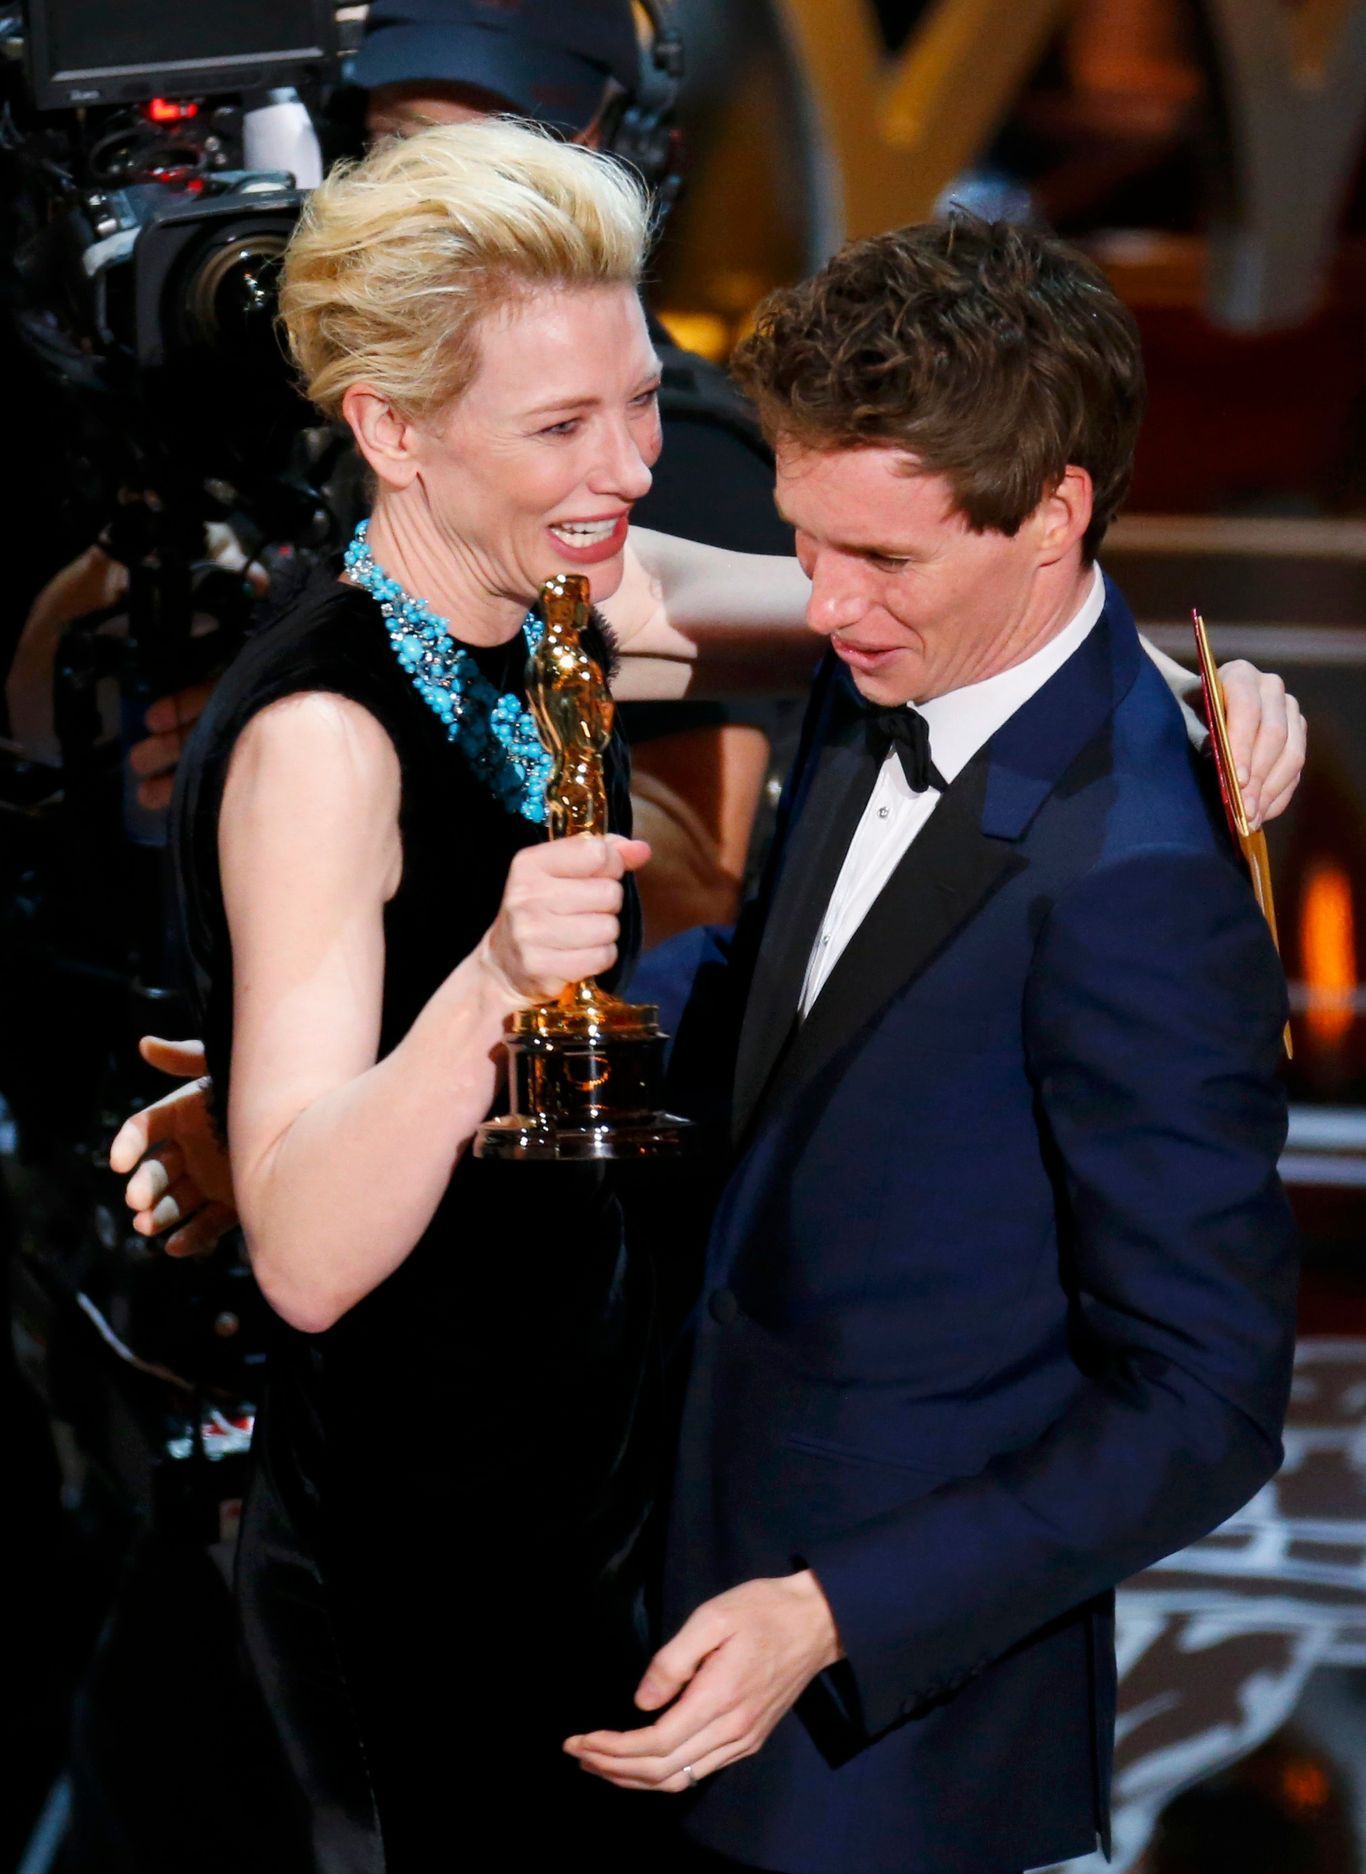 Actress Cate Blanchett presents the Oscar for best actor to Eddie Redmayne for his role in &quot;The Theory of Everything&quot; during the 87th Academy Awards in Hollywood